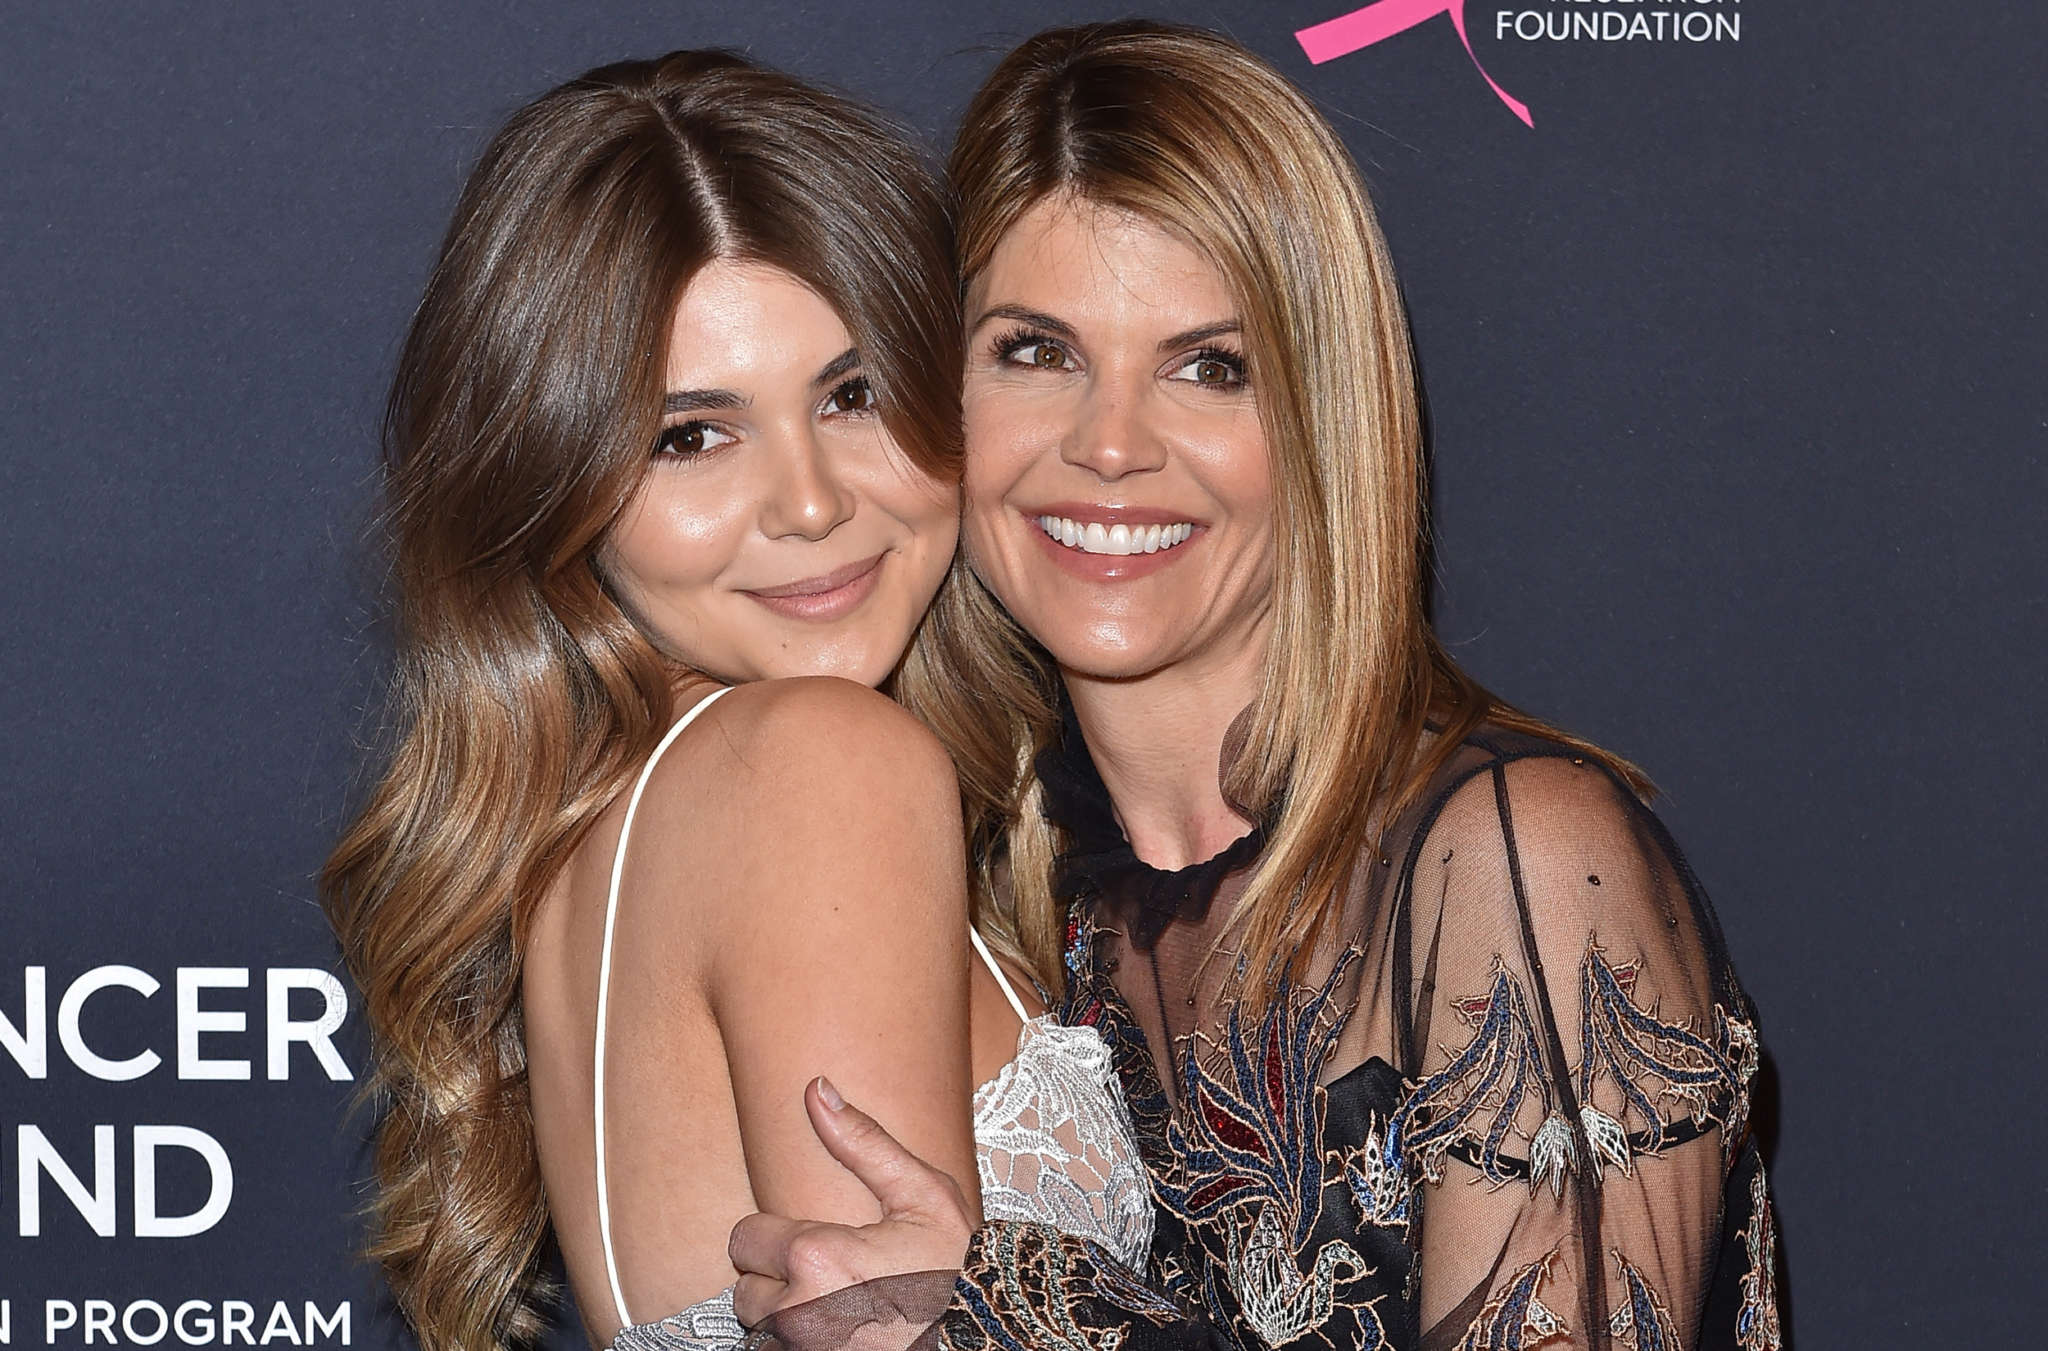 olivia-jade-is-worried-about-her-future-while-mom-lori-loughlin-and-her-dad-mossimo-giannulli-face-jail-time